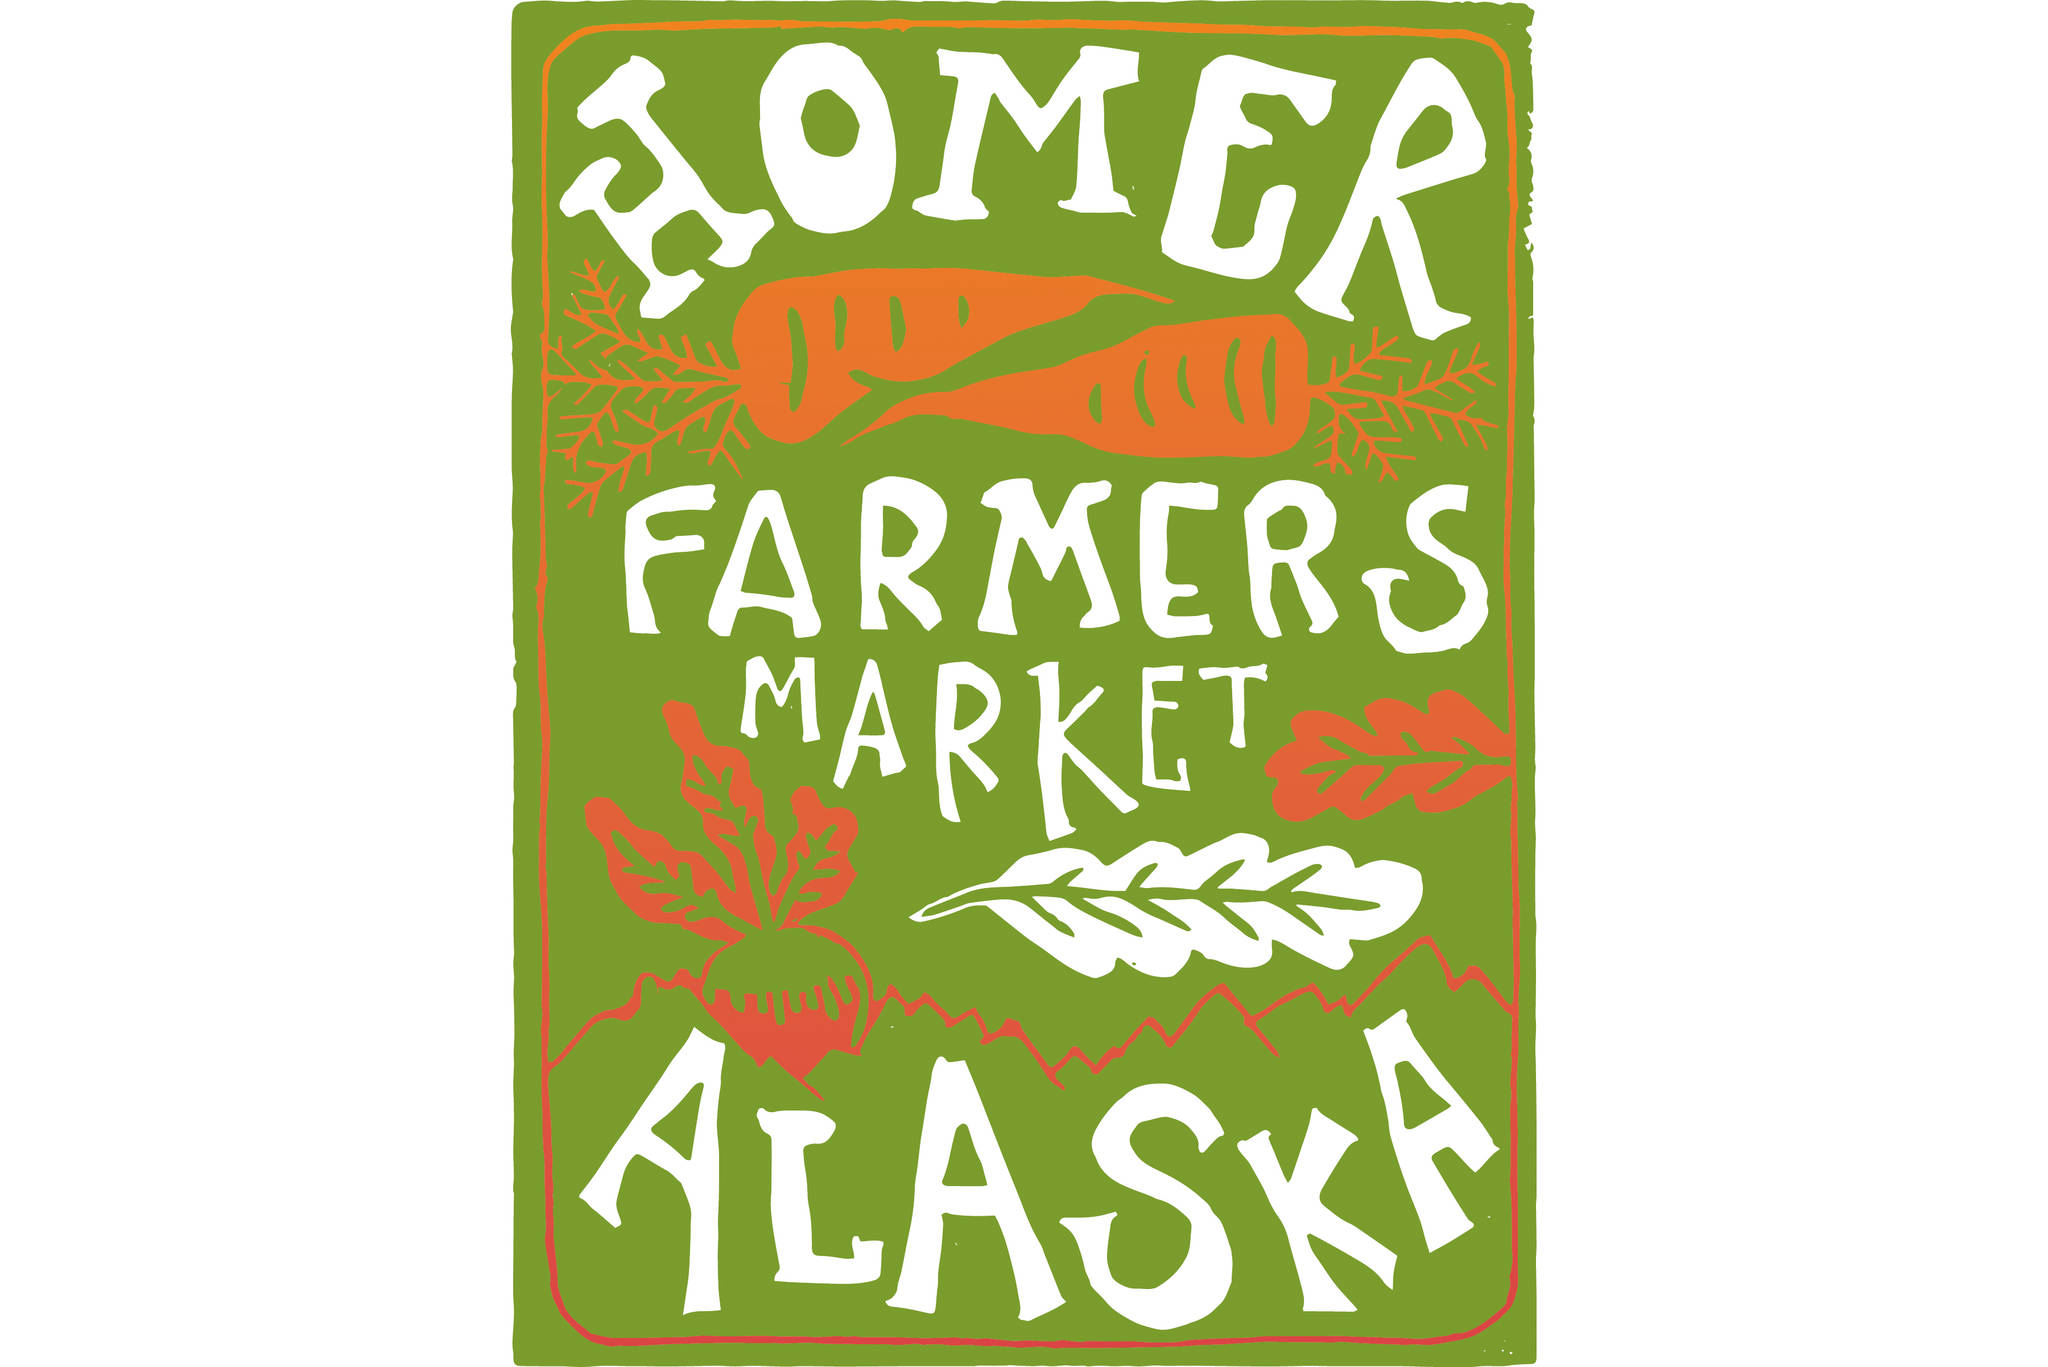 Farmers Market: Celebrate 20th anniversary with new cookbook